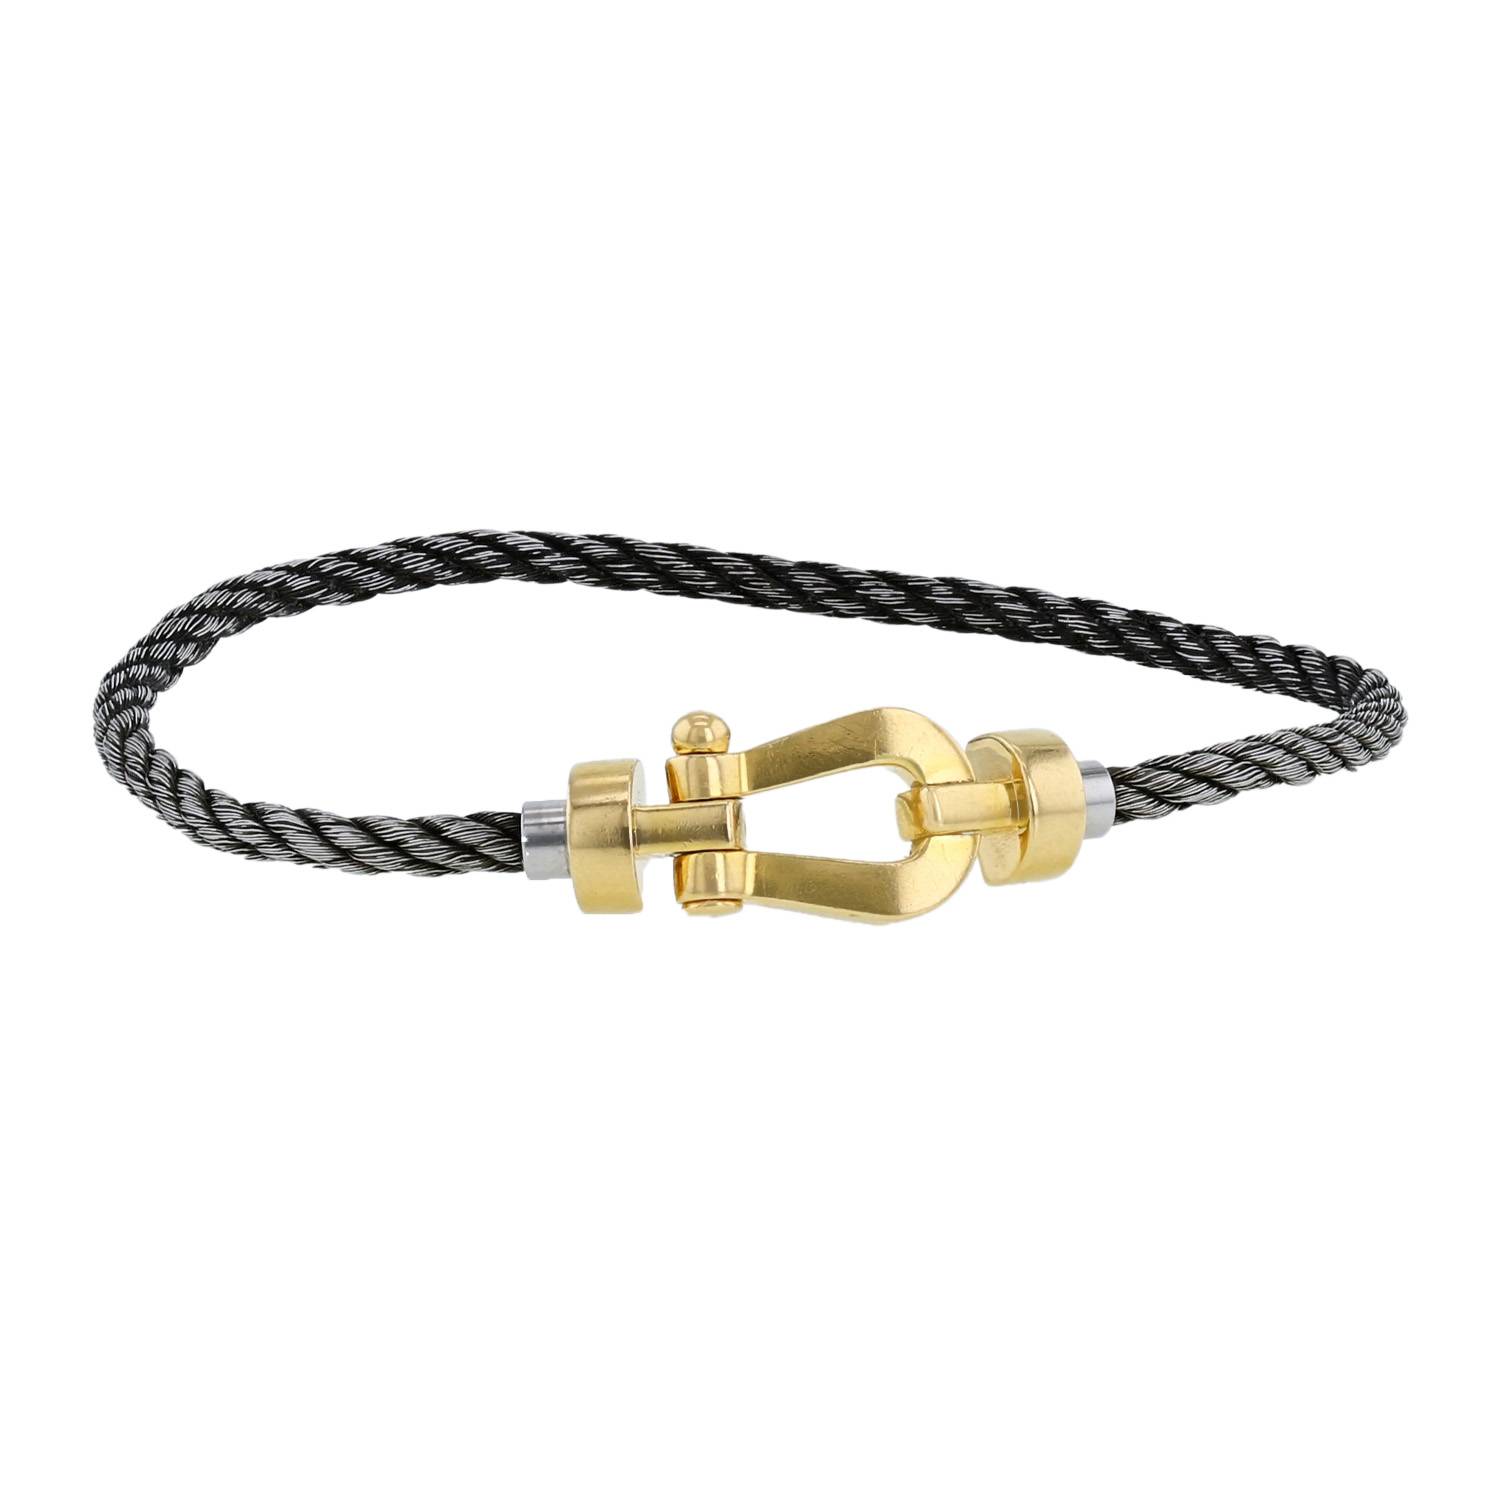 Fred - Authenticated Force 10 Bracelet - Yellow Gold White for Women, Very Good Condition